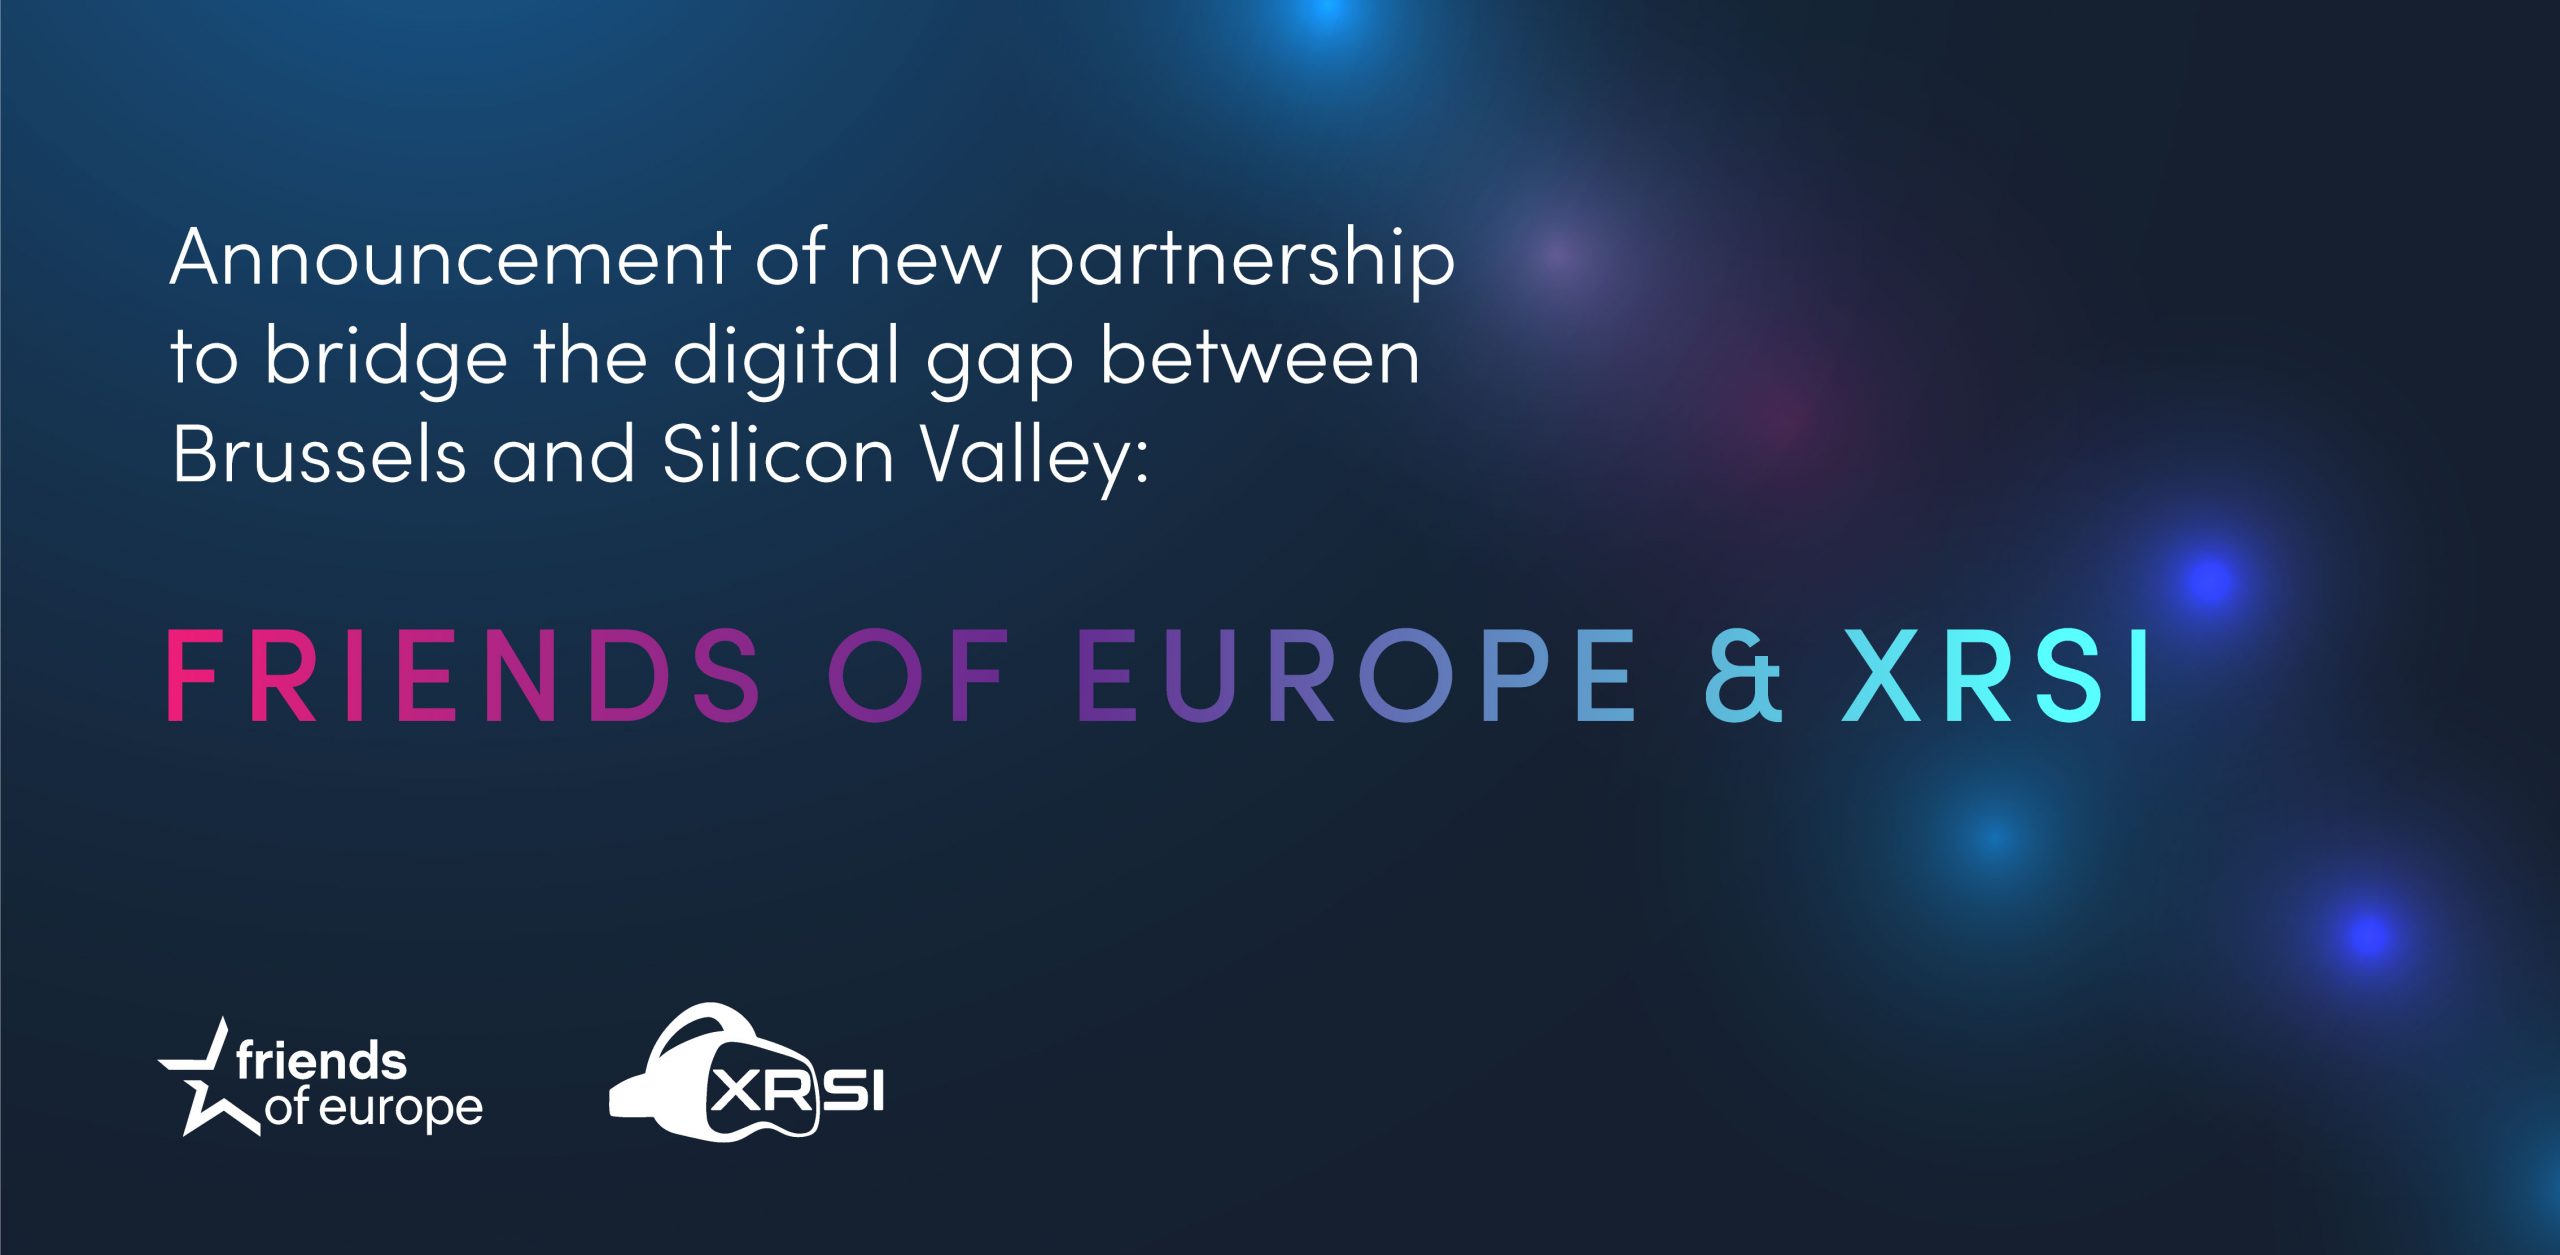 Announcement of new partnership to bridge the digital gap between Brussels and Silicon Valley: Friends of Europe and XRSI